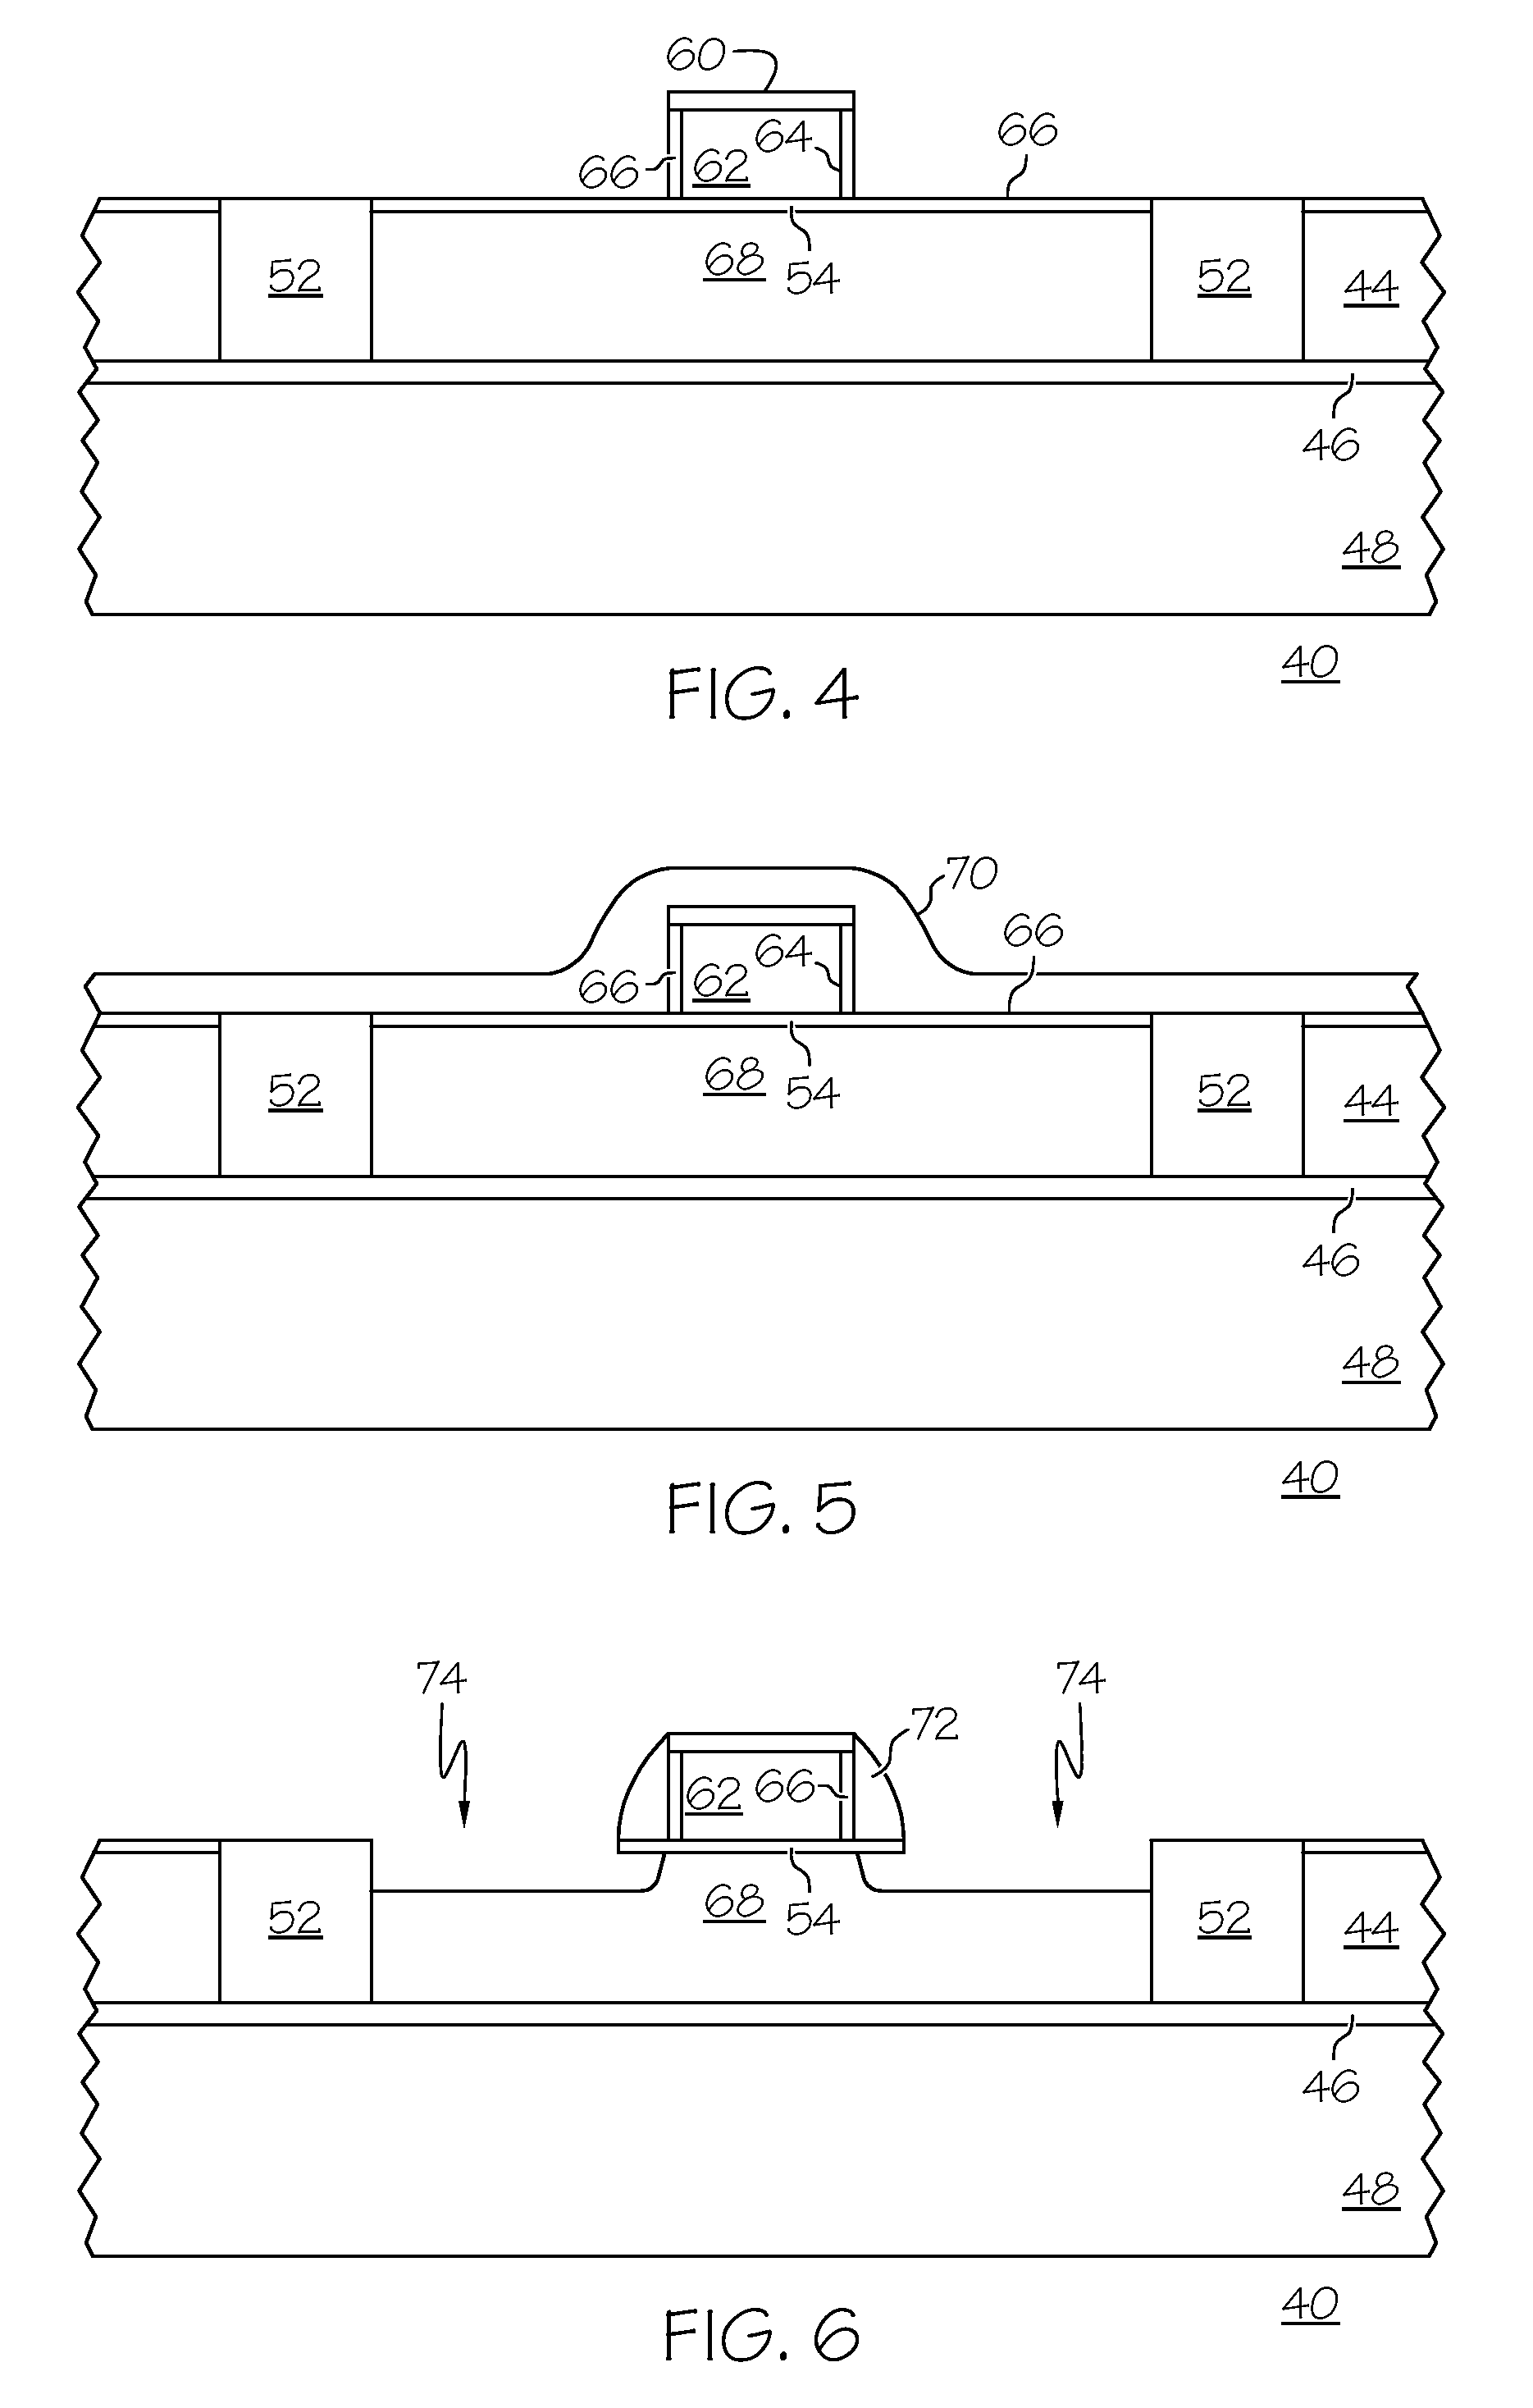 Stressed field effect transistor and methods for its fabrication